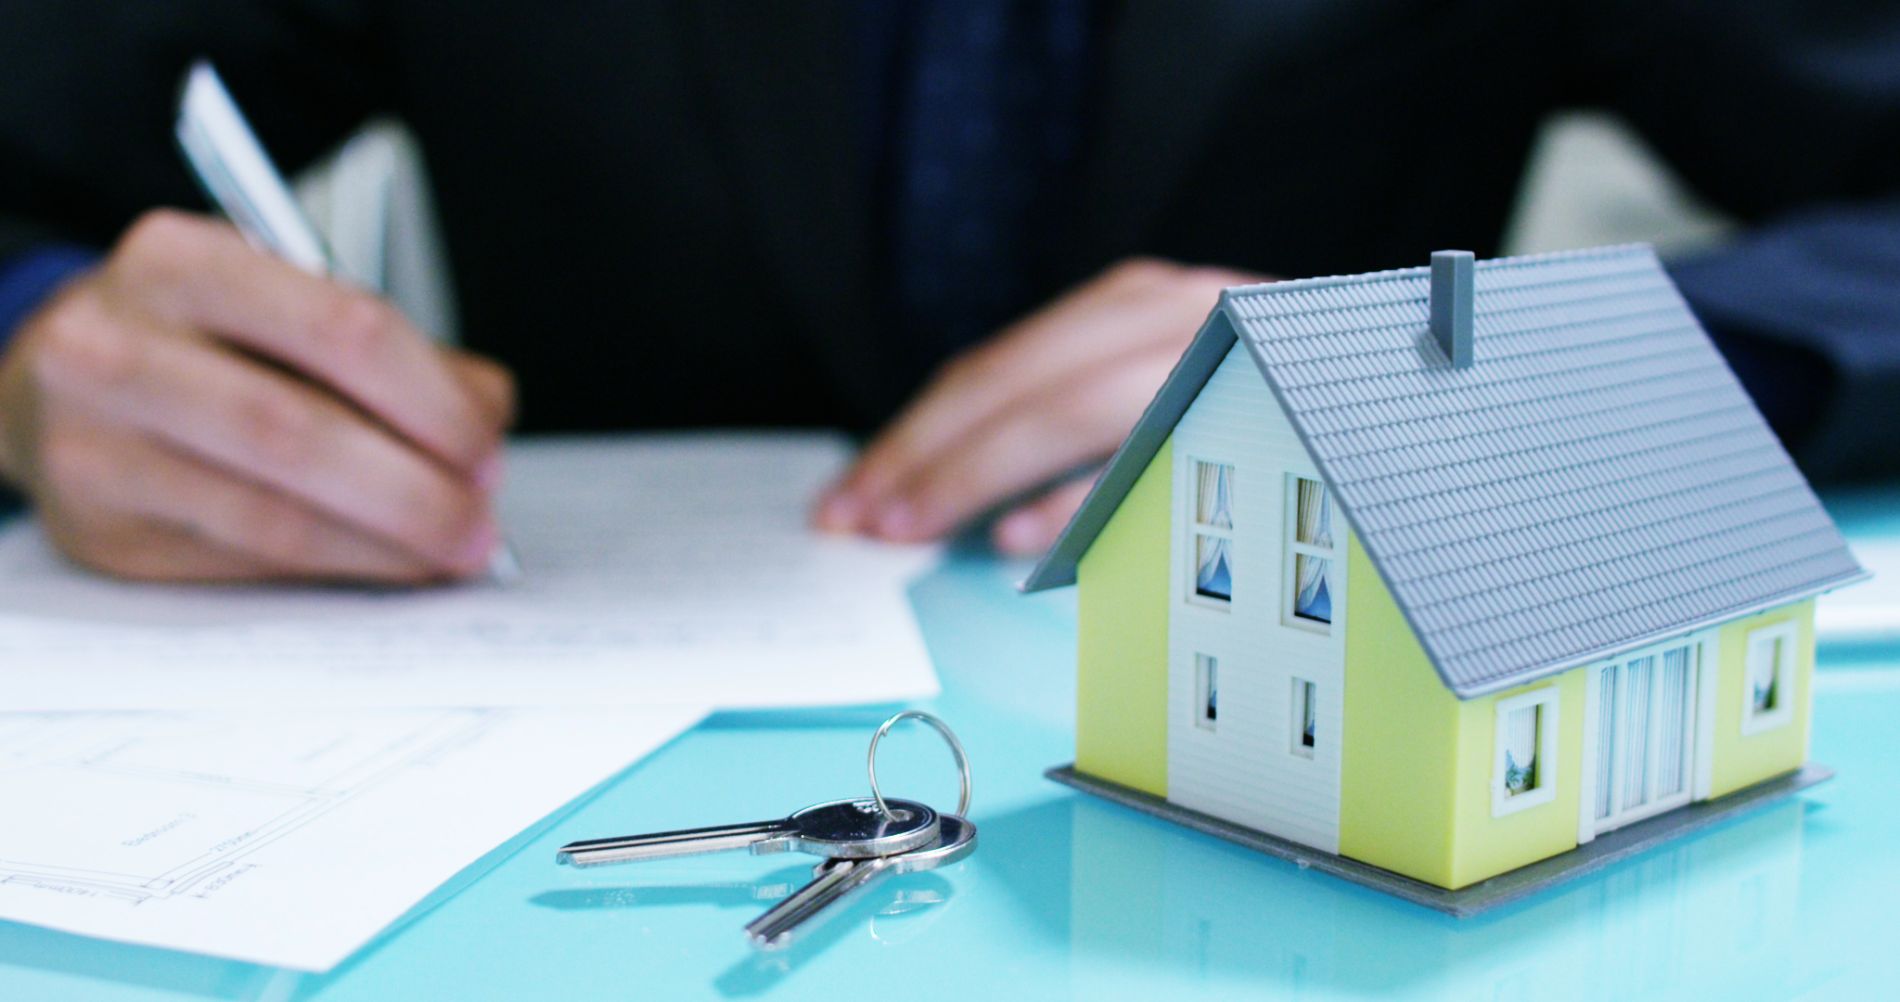 a blurred image of someone signing a property contract with a miniature house and a set of keys on a desk in the foreground